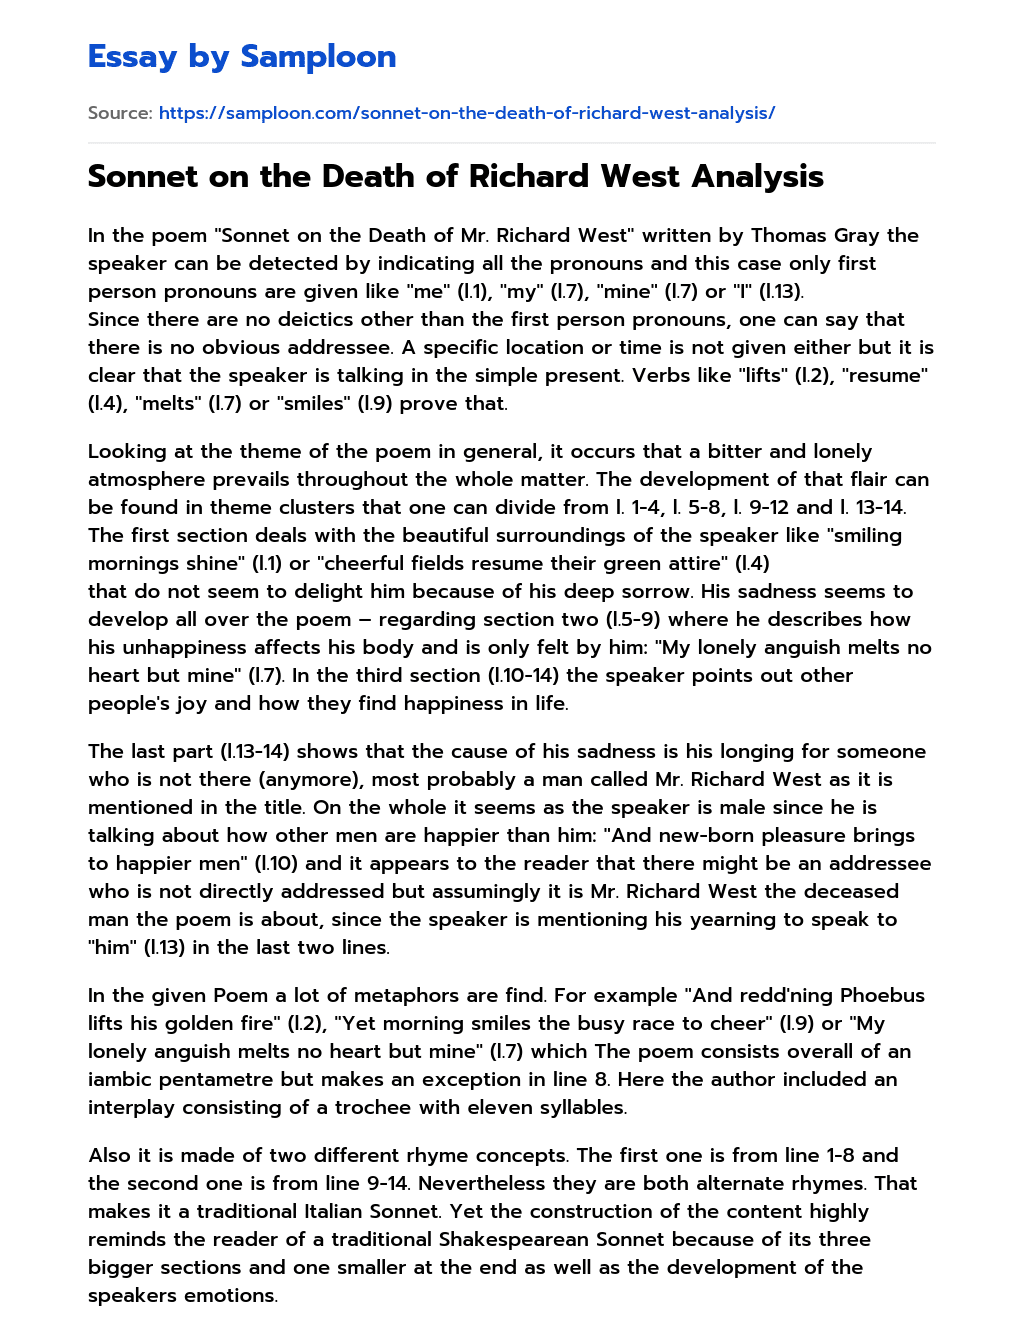 Sonnet on the Death of Richard West Analysis essay